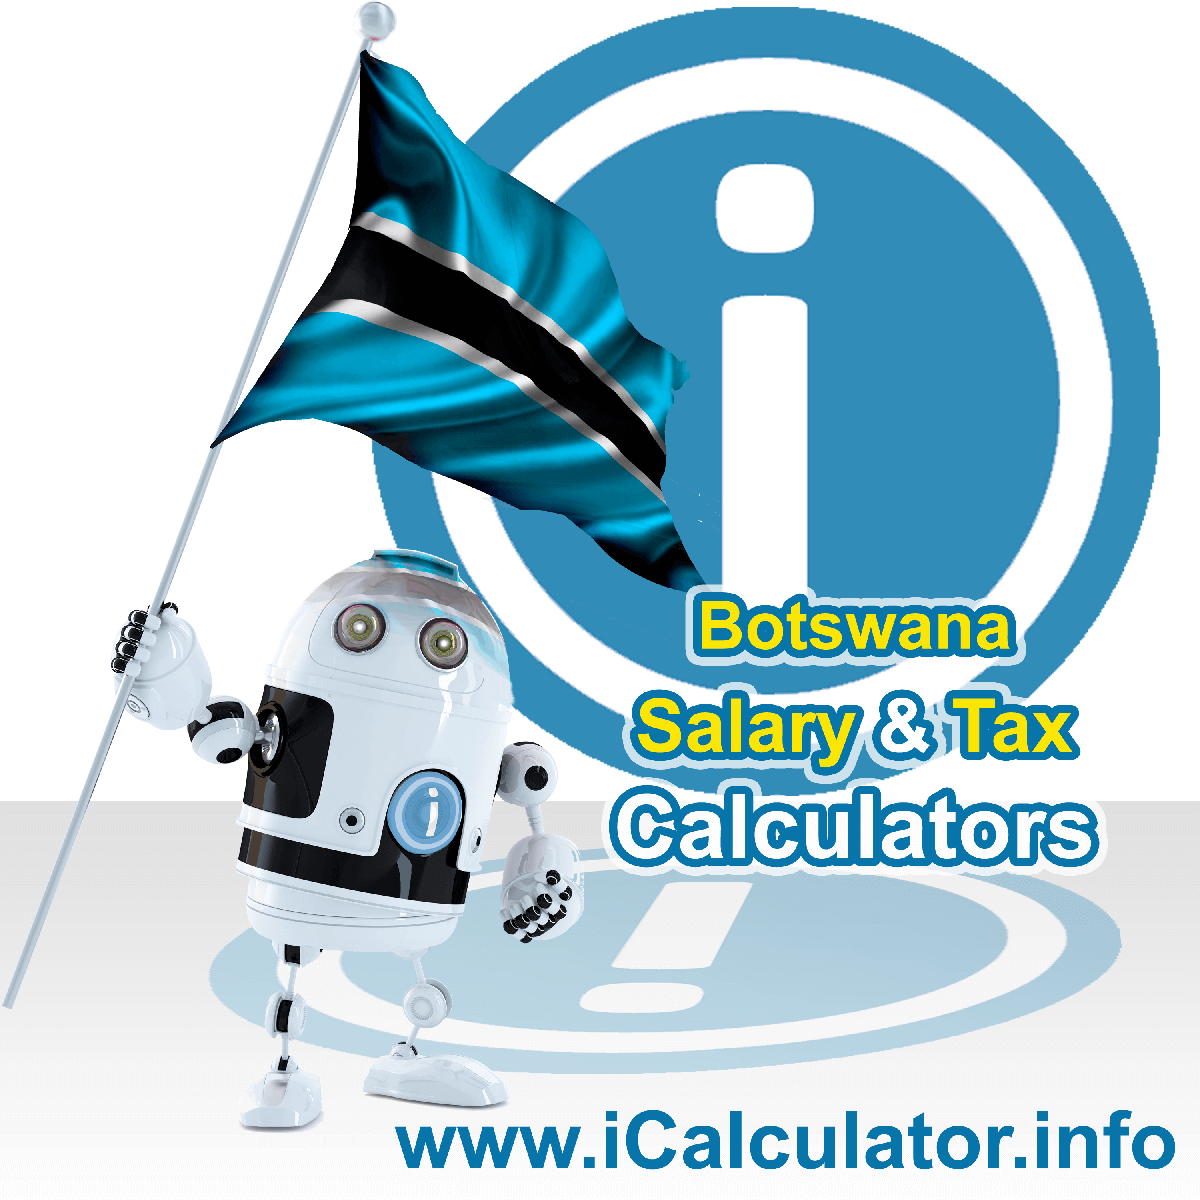 Botswana Tax Calculator. This image shows the Botswana flag and information relating to the tax formula for the Botswana Salary Calculator